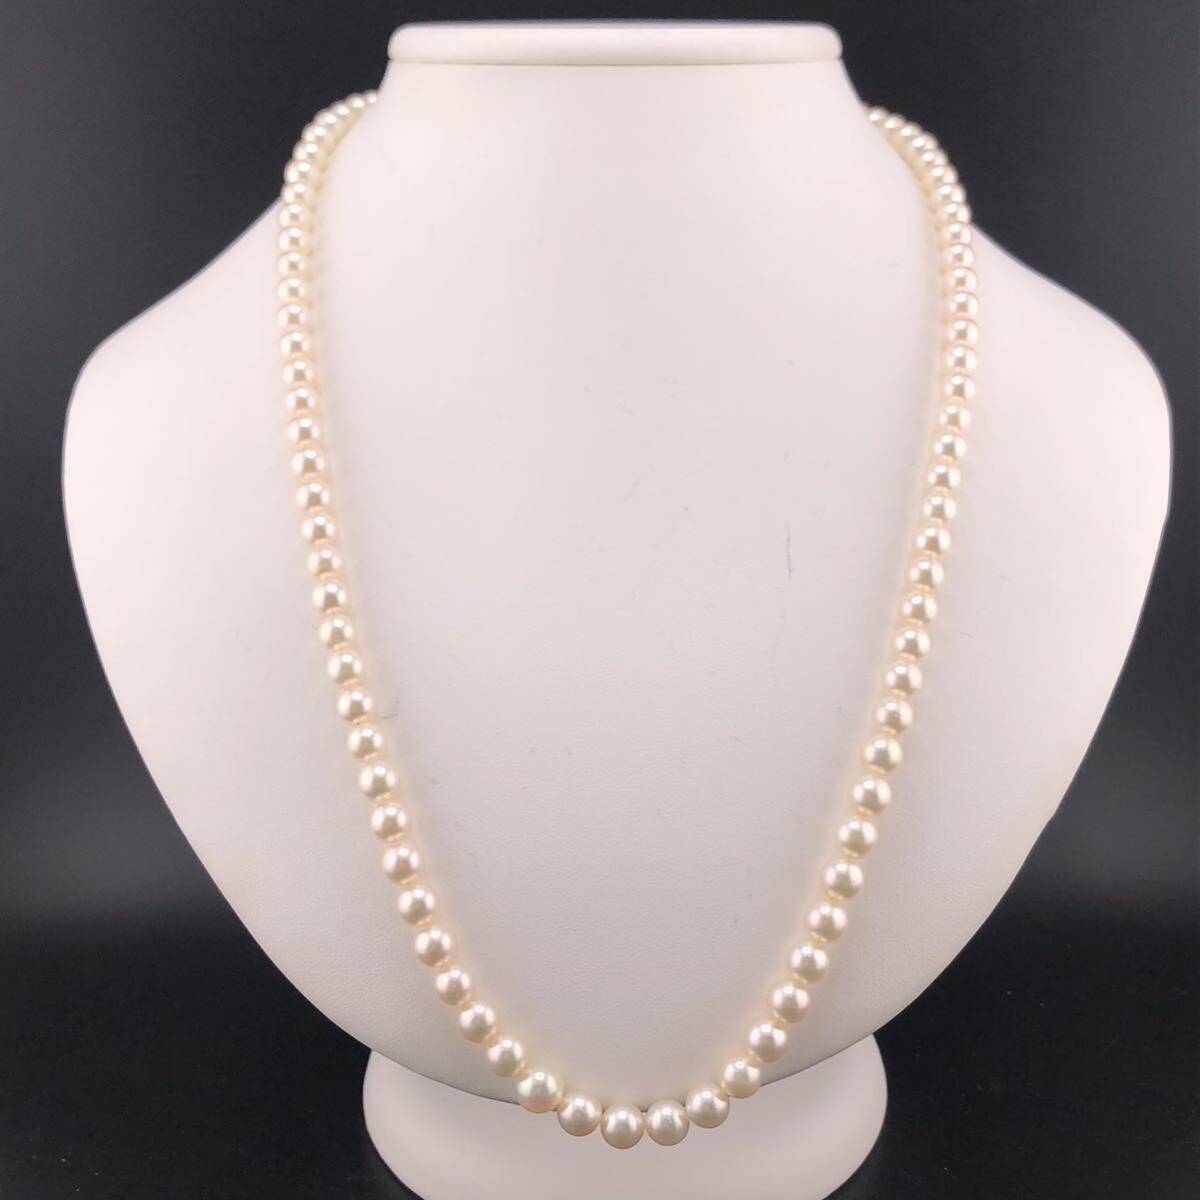 P04-0019 アコヤパールネックレス 6.5mm~7.0mm 59cm 39.6g ( アコヤ真珠 Pearl necklace SILVER )の画像1